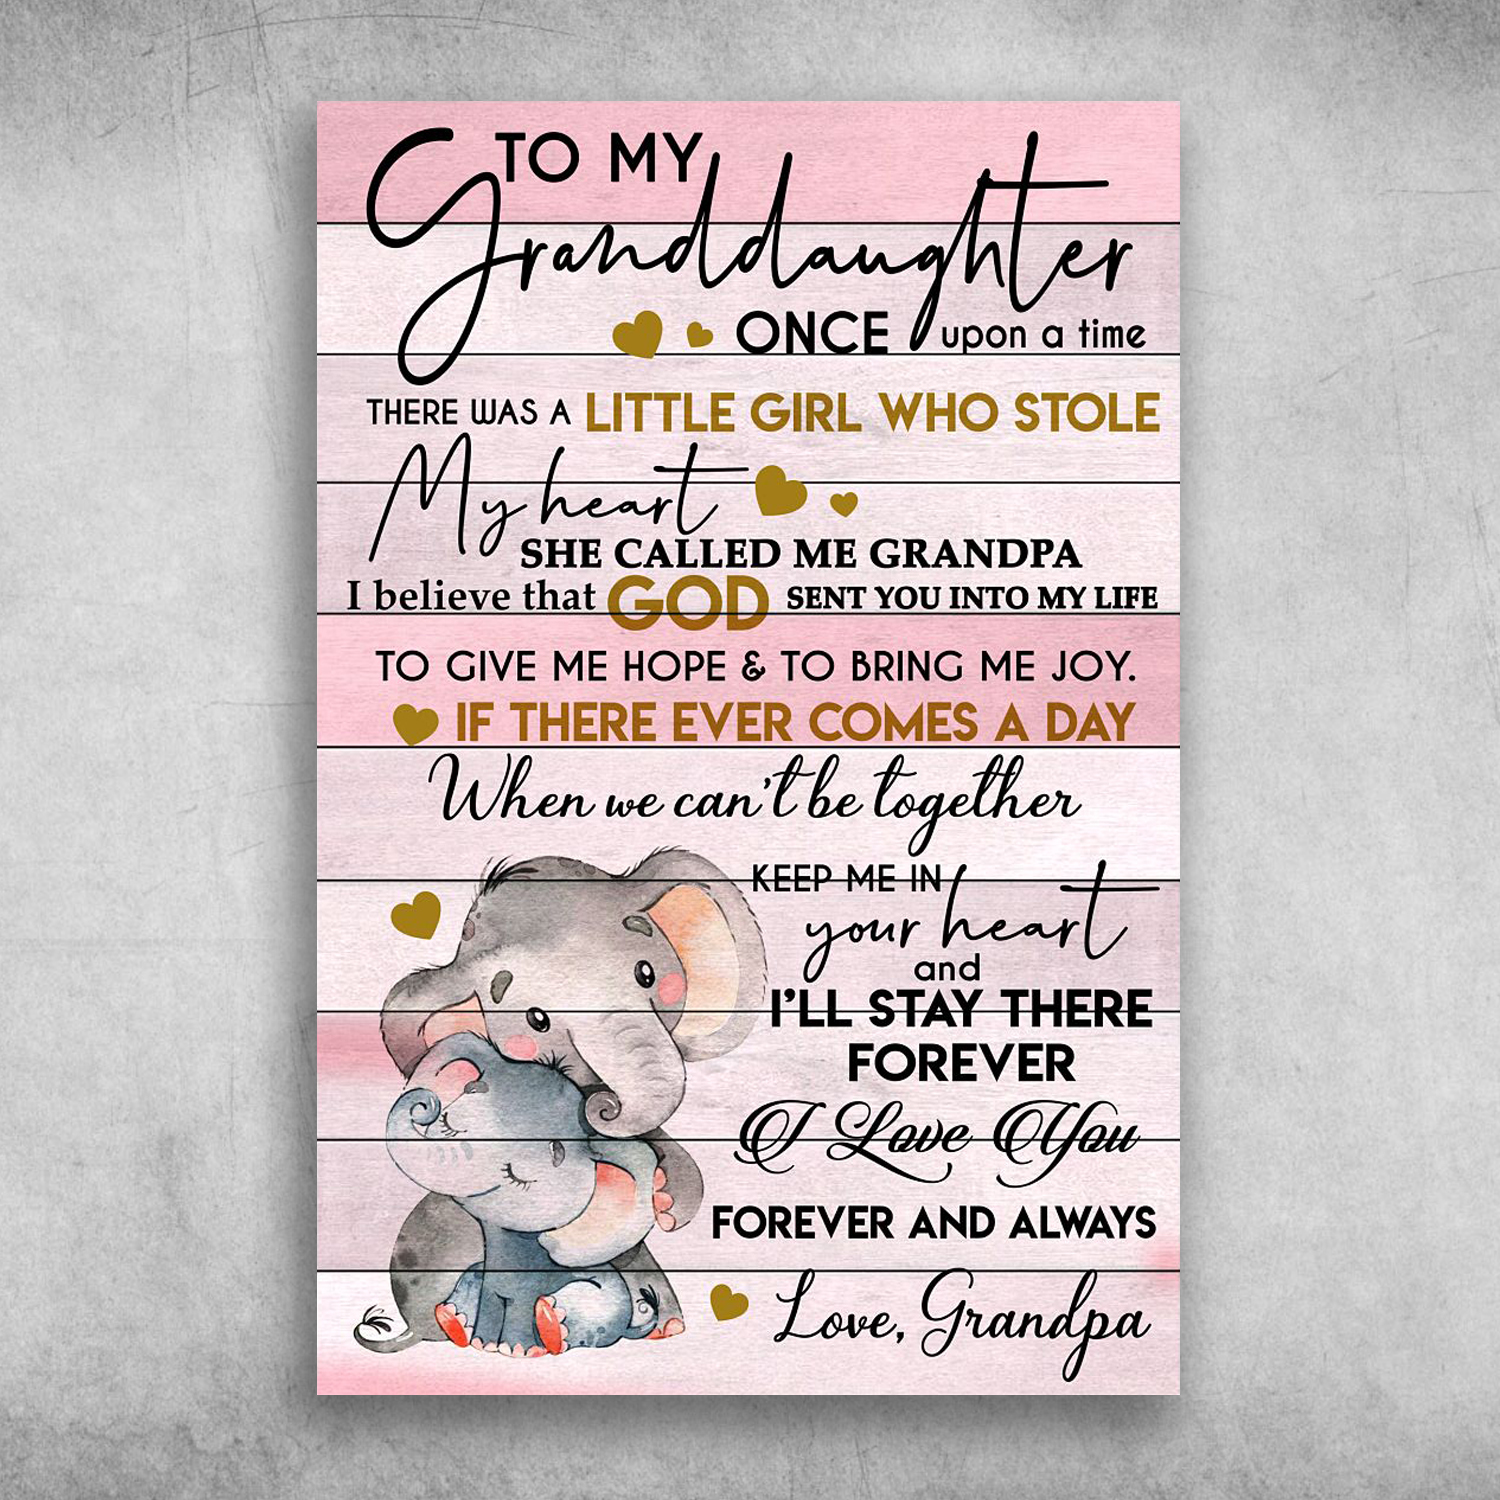 To My Granddaughter I Believe That God Sent You Into My Life